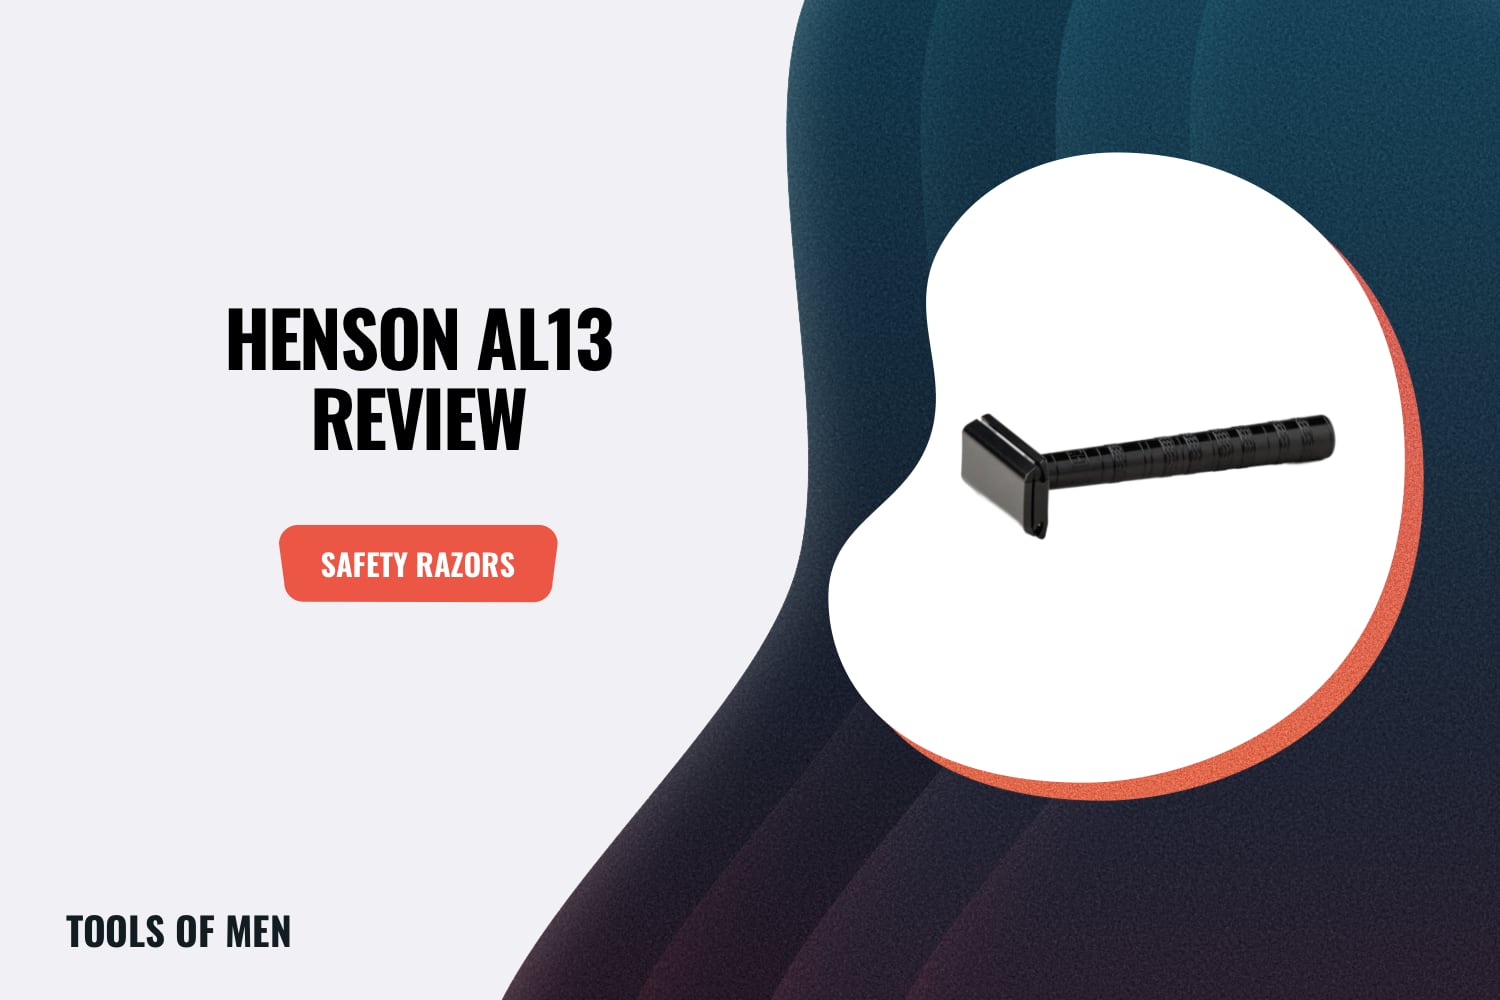 generic image with henson al13 next to title